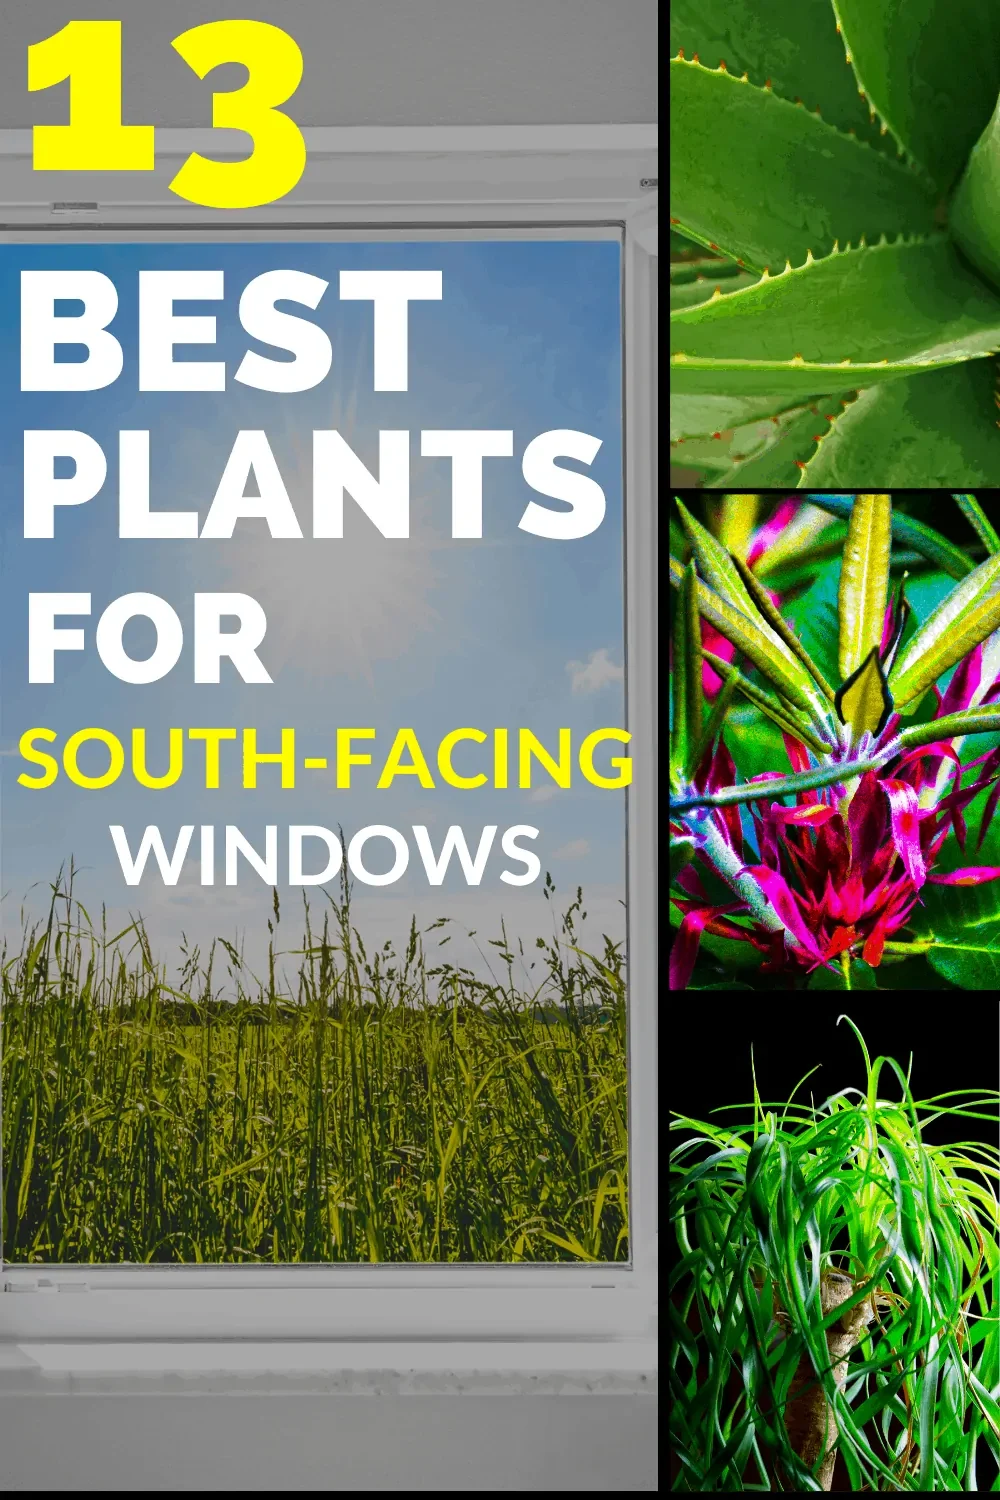 13 Best Plants for South-Facing Windows